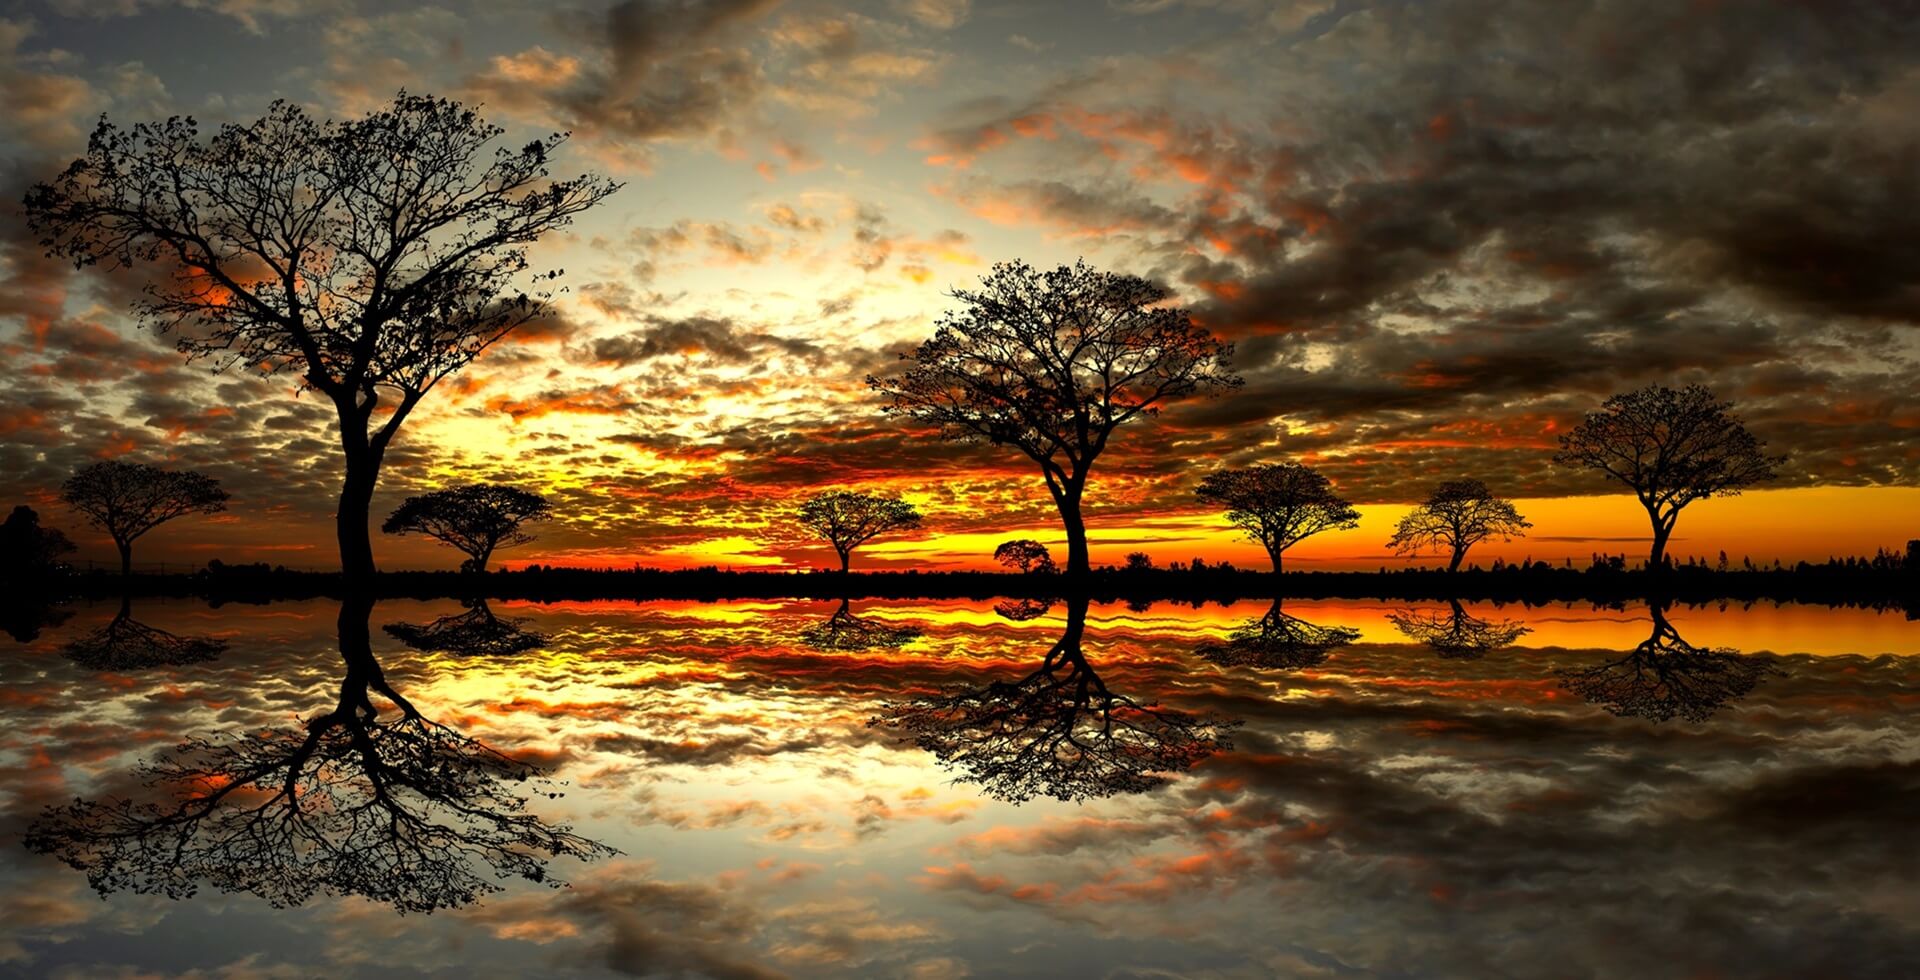 Footer Panorama silhouette tree in africa with sunset.Tree silhouetted against a setting sun reflection on water.Typical african sunset with acacia trees in Masai Mara, Kenya